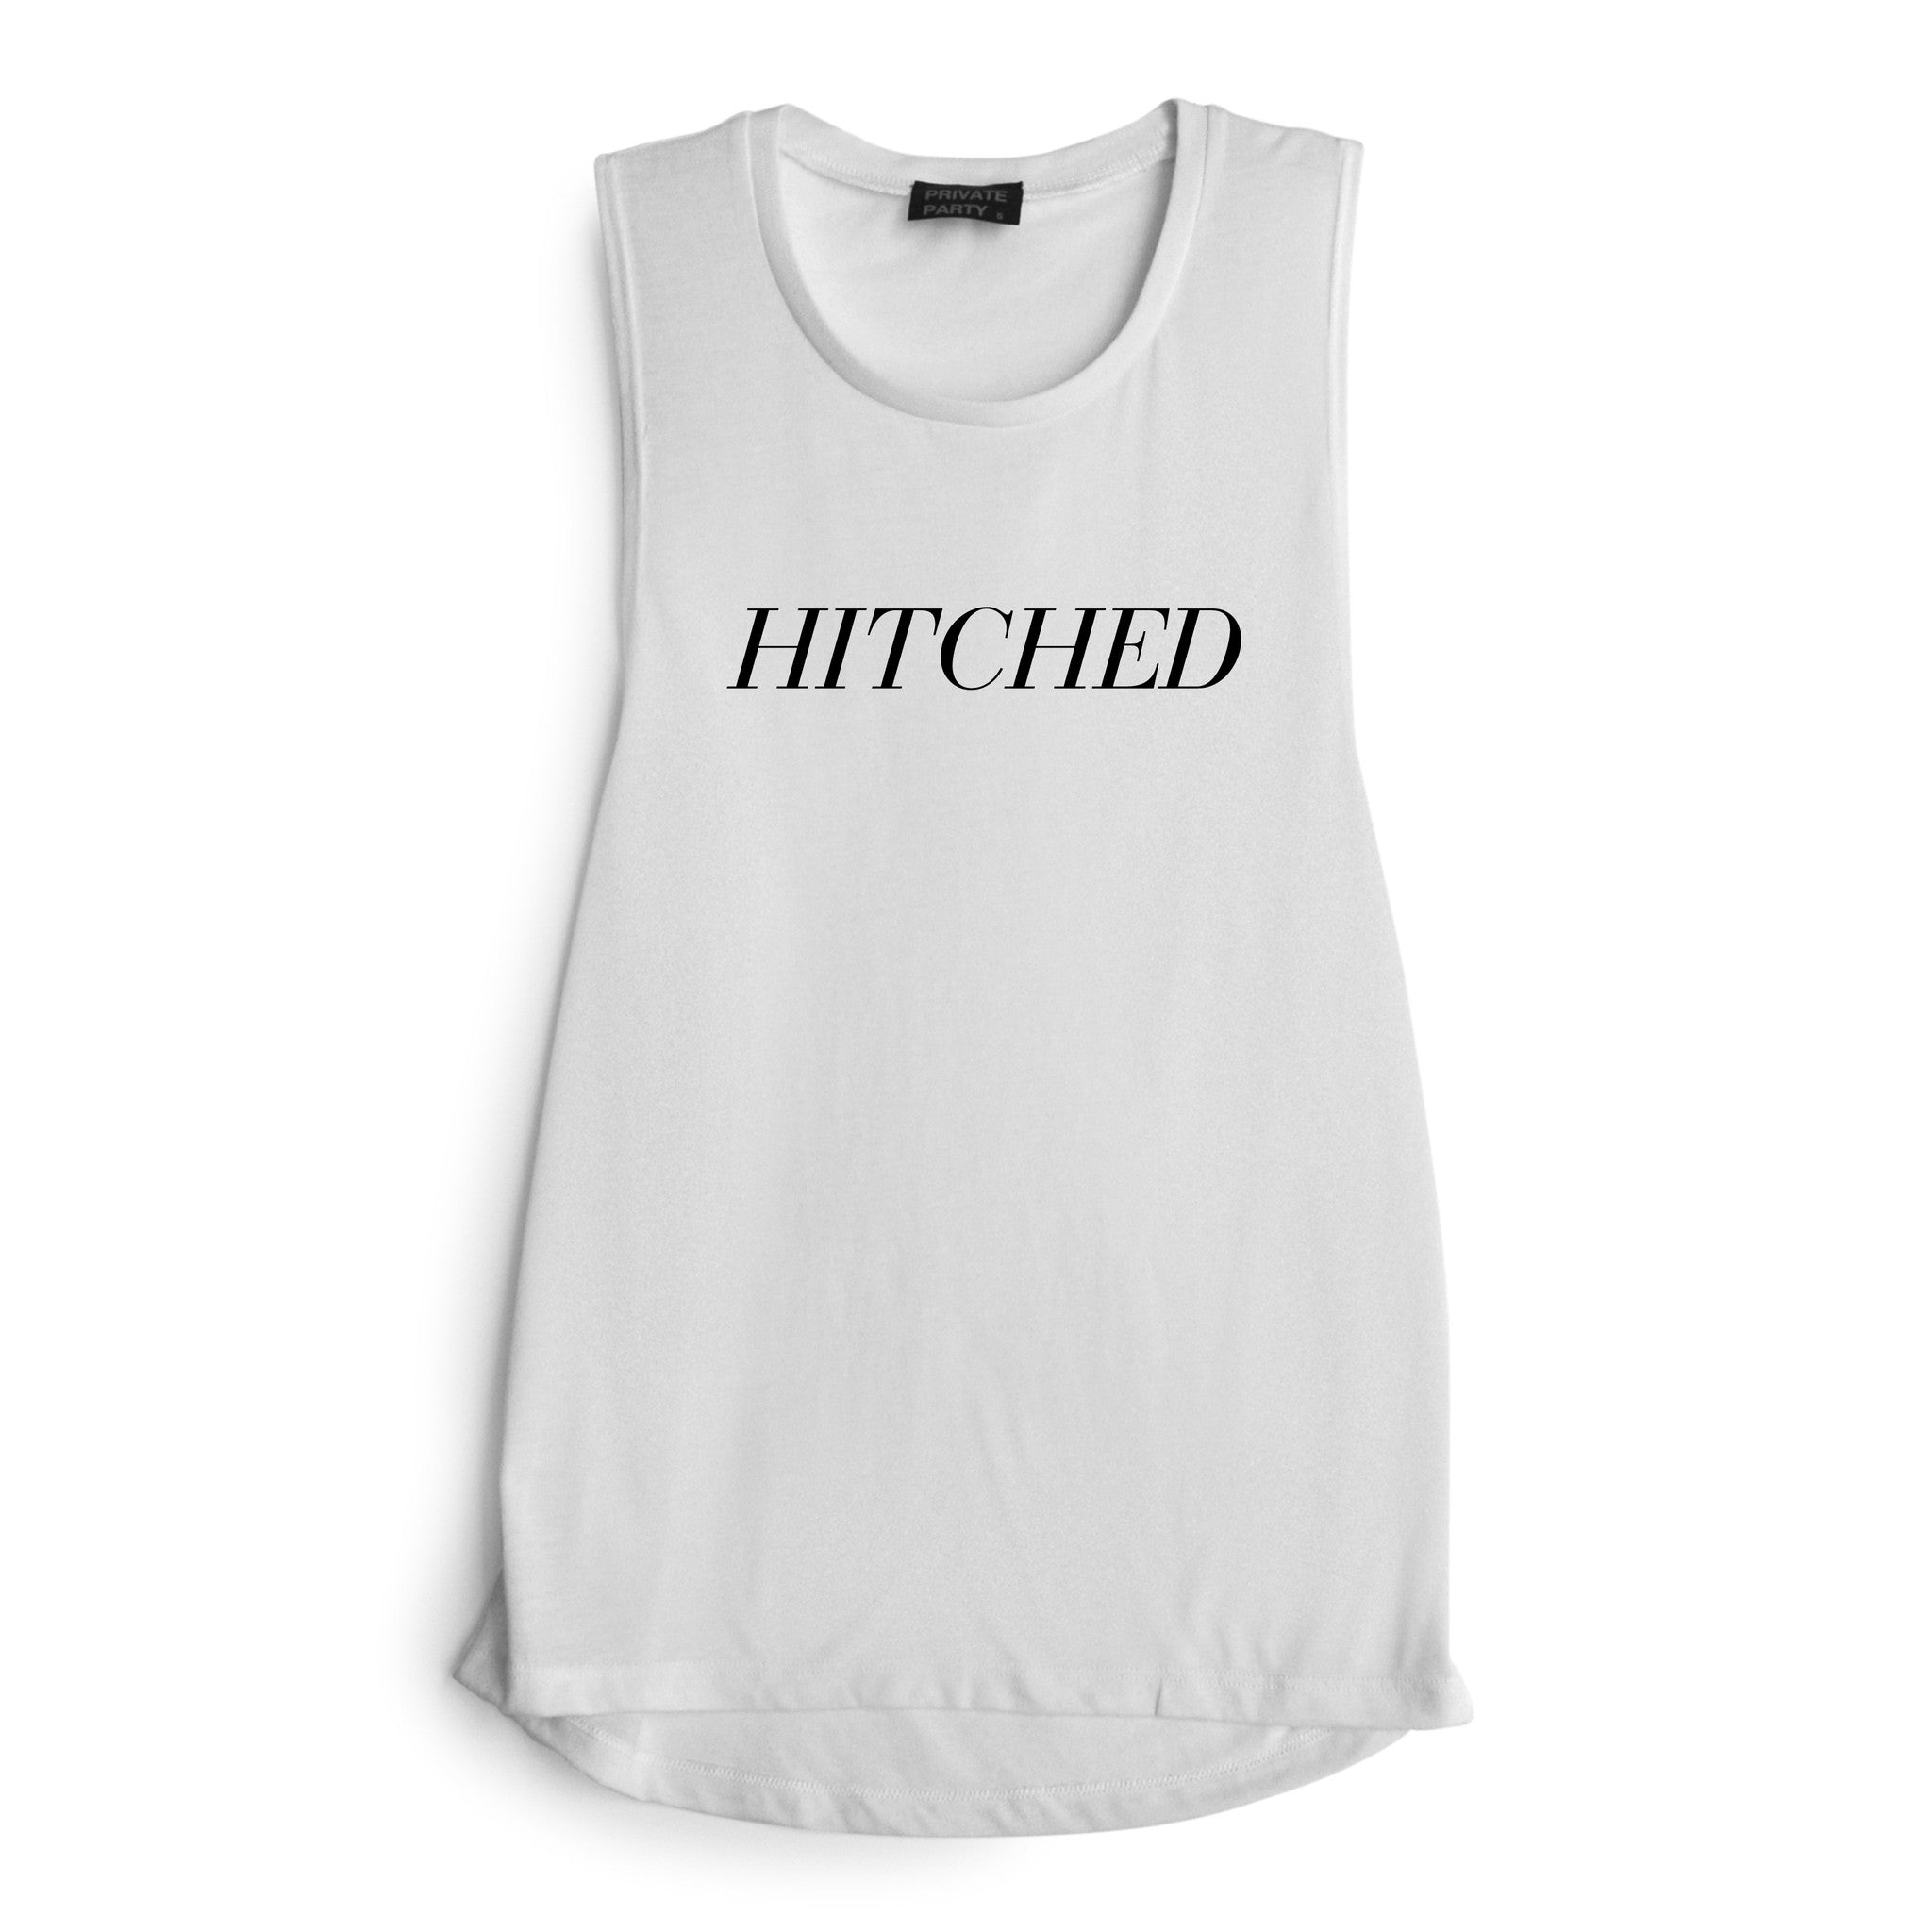 HITCHED [MUSCLE TANK]